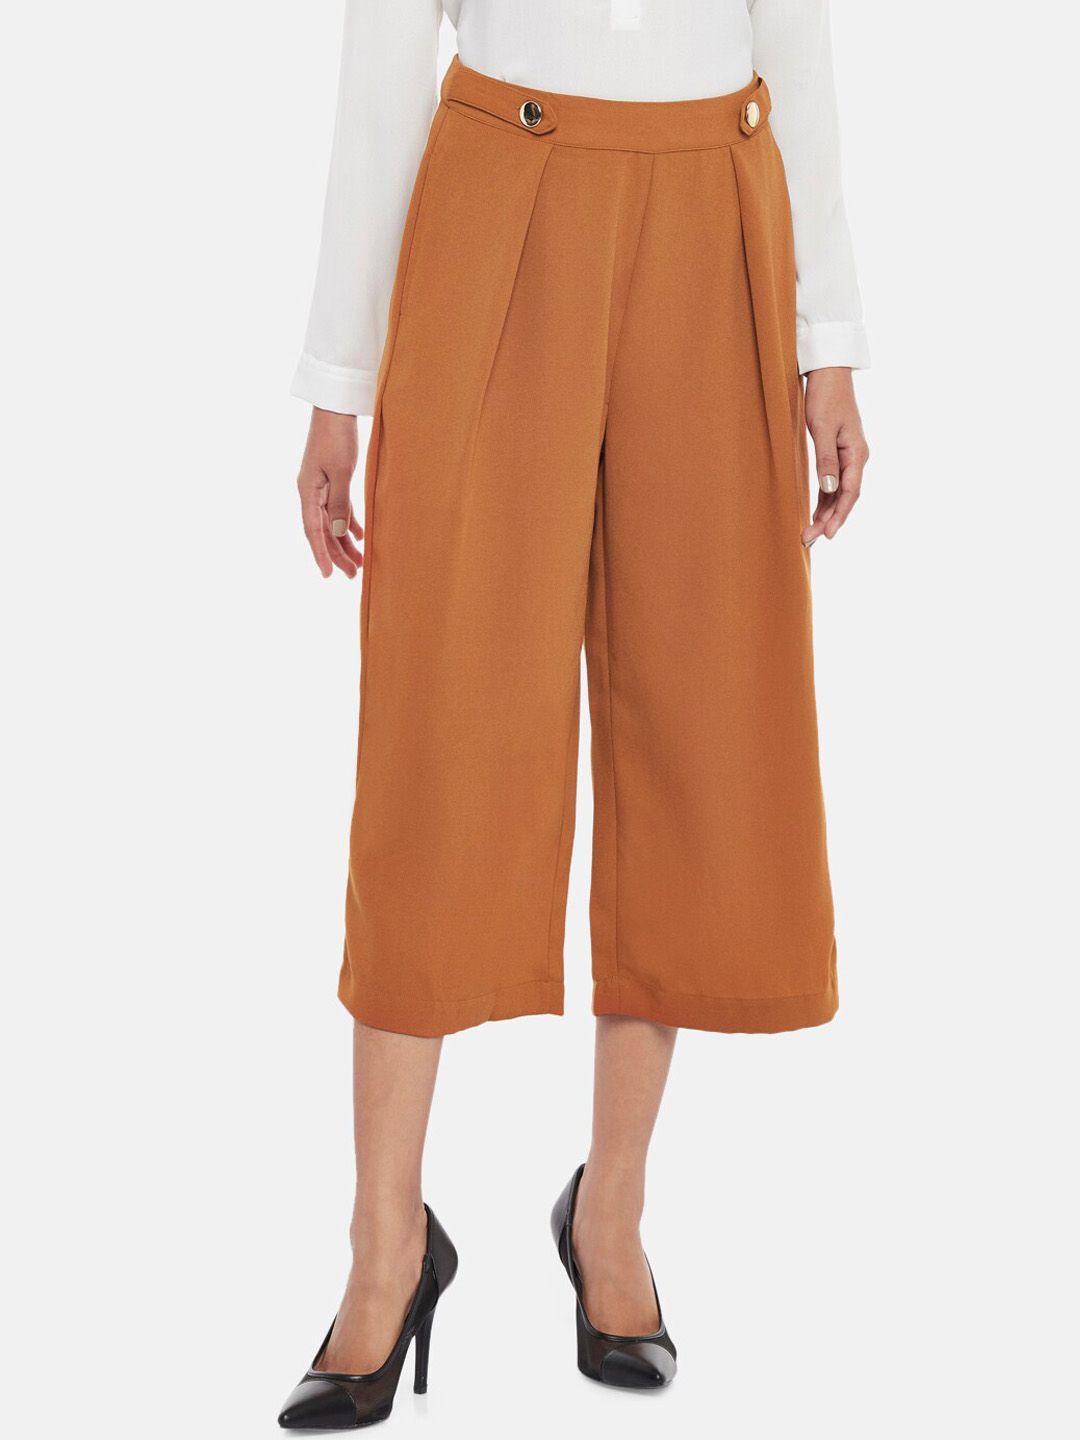 annabelle by pantaloons women tan high-rise pleated culottes trousers